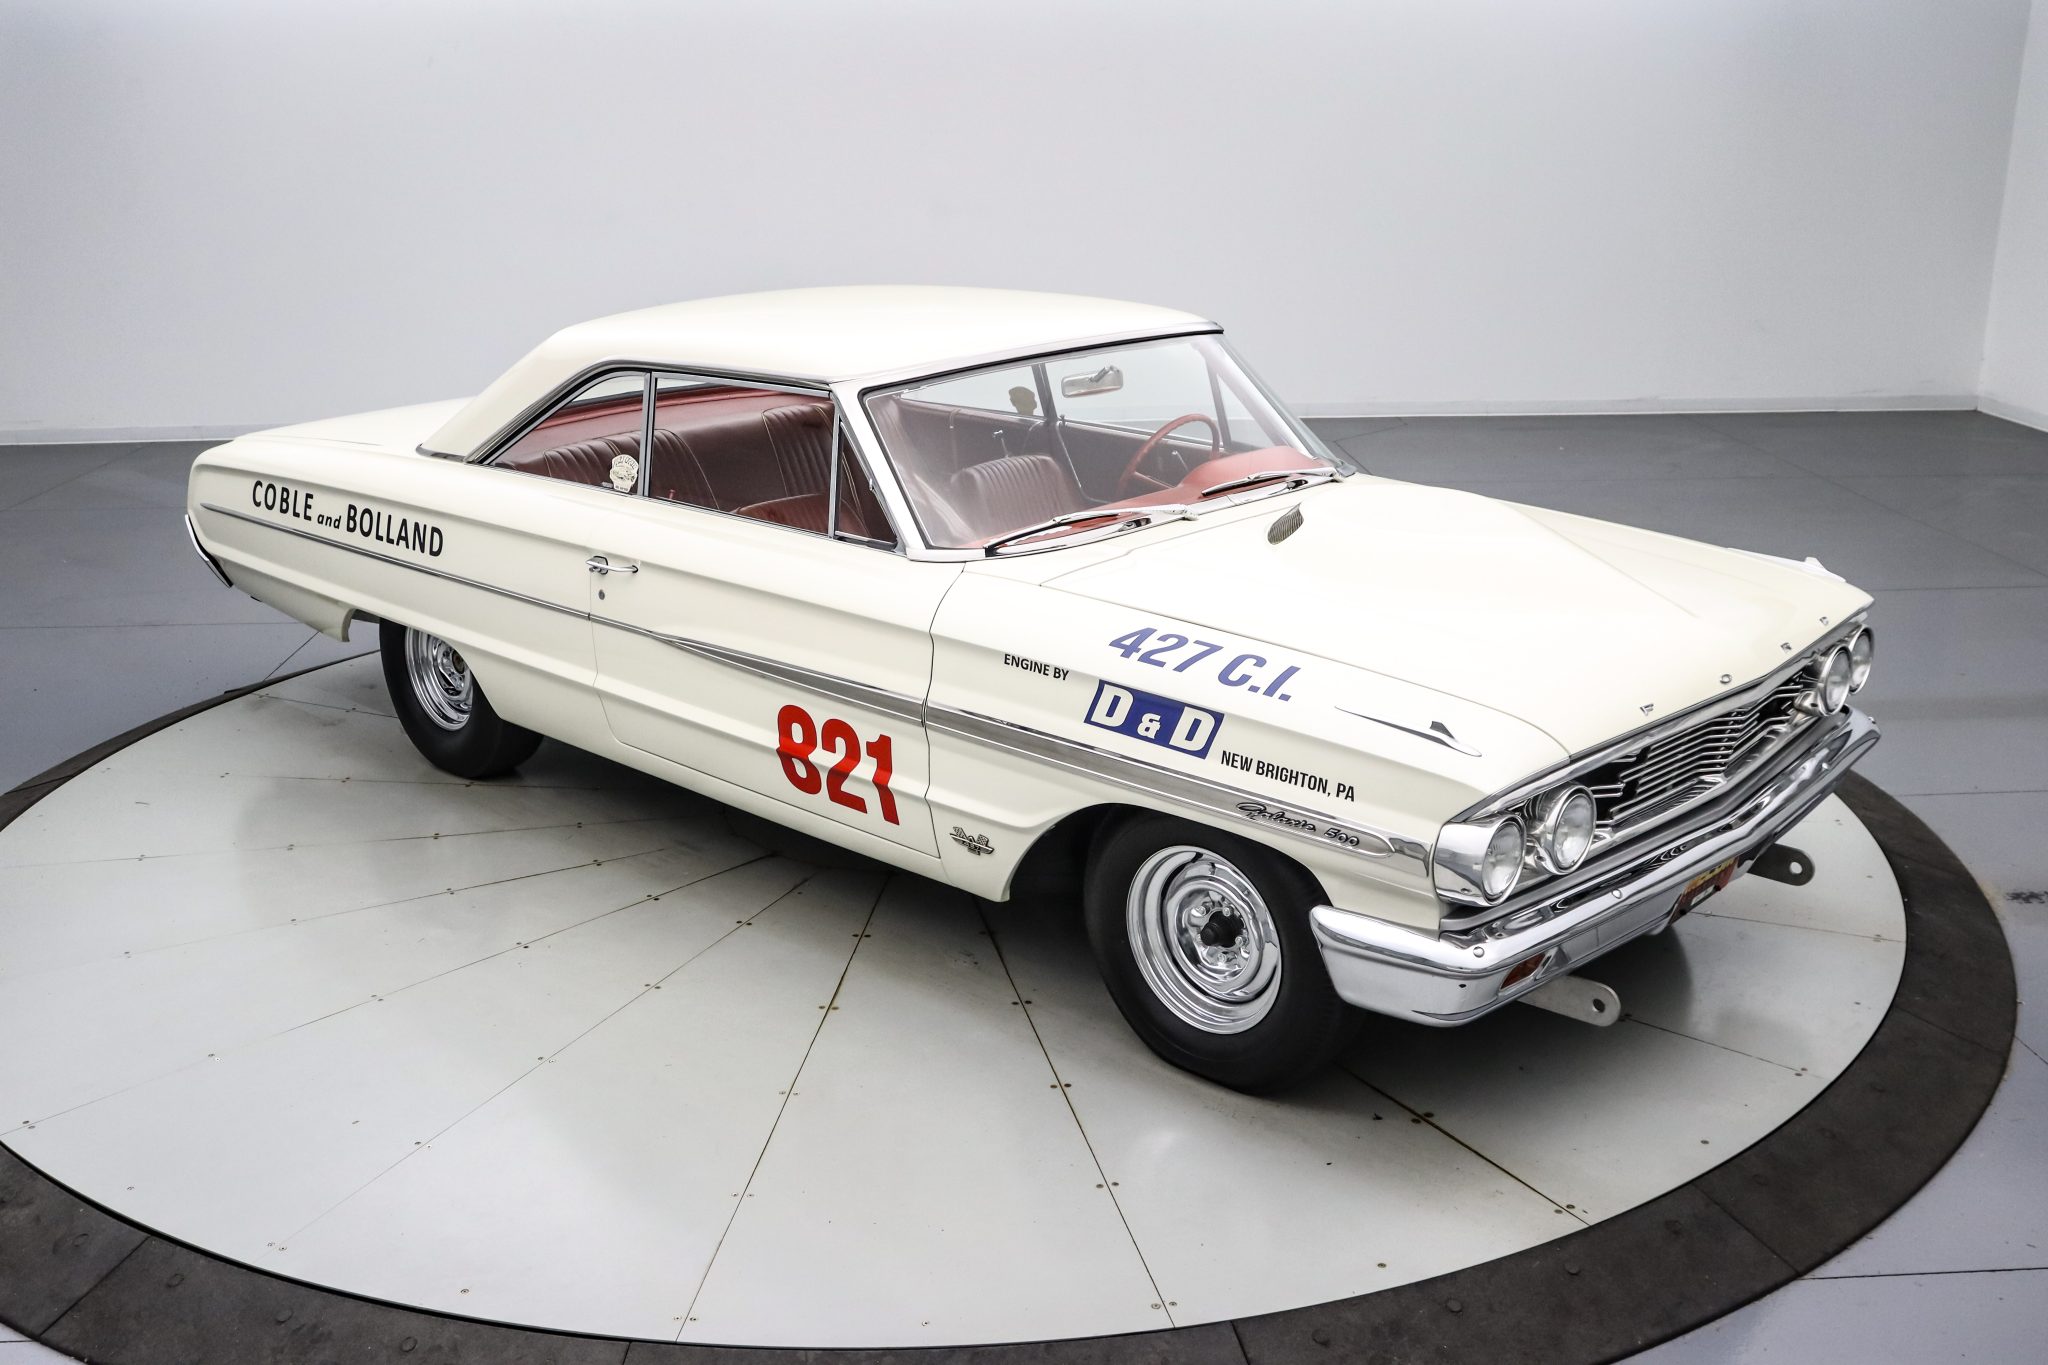 Used 1964 Ford Galaxie 500 Lightweight Review